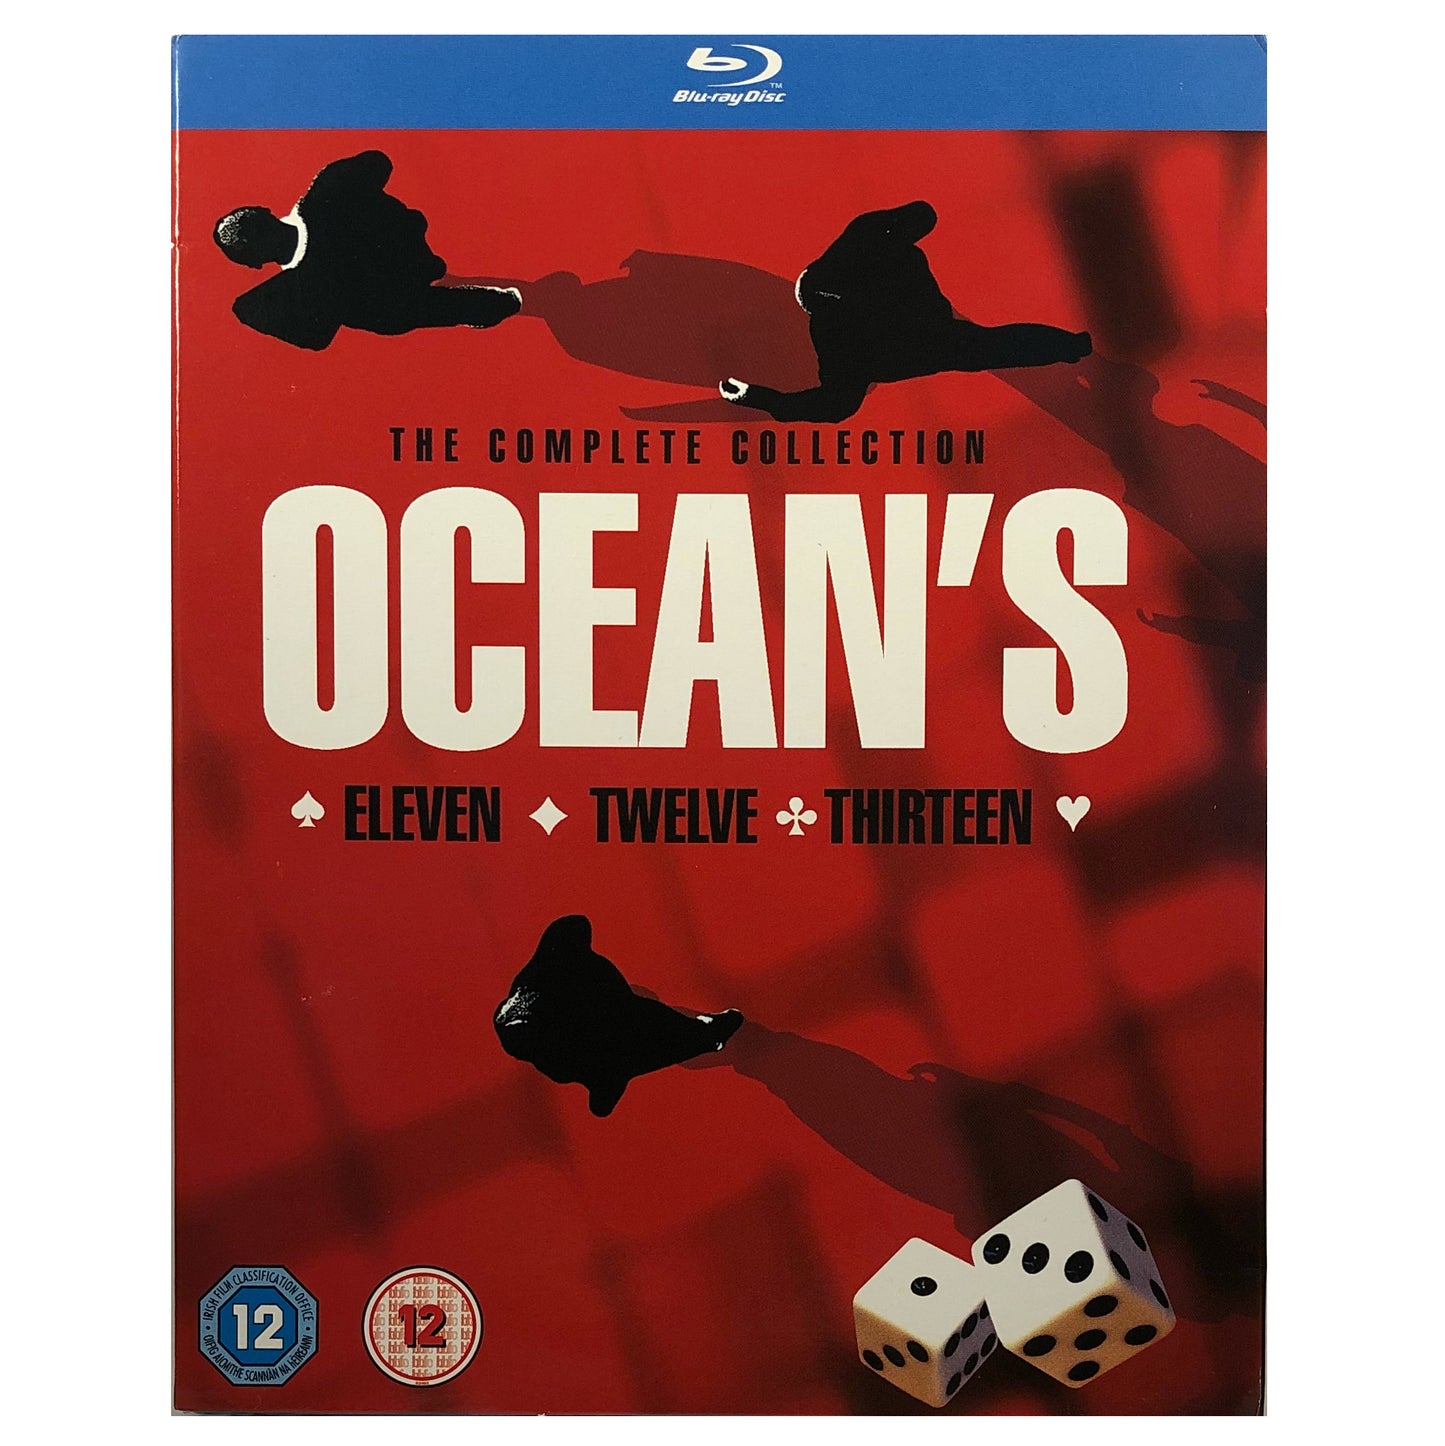 The Complete Ocean's Collection Blu-Ray Box Set